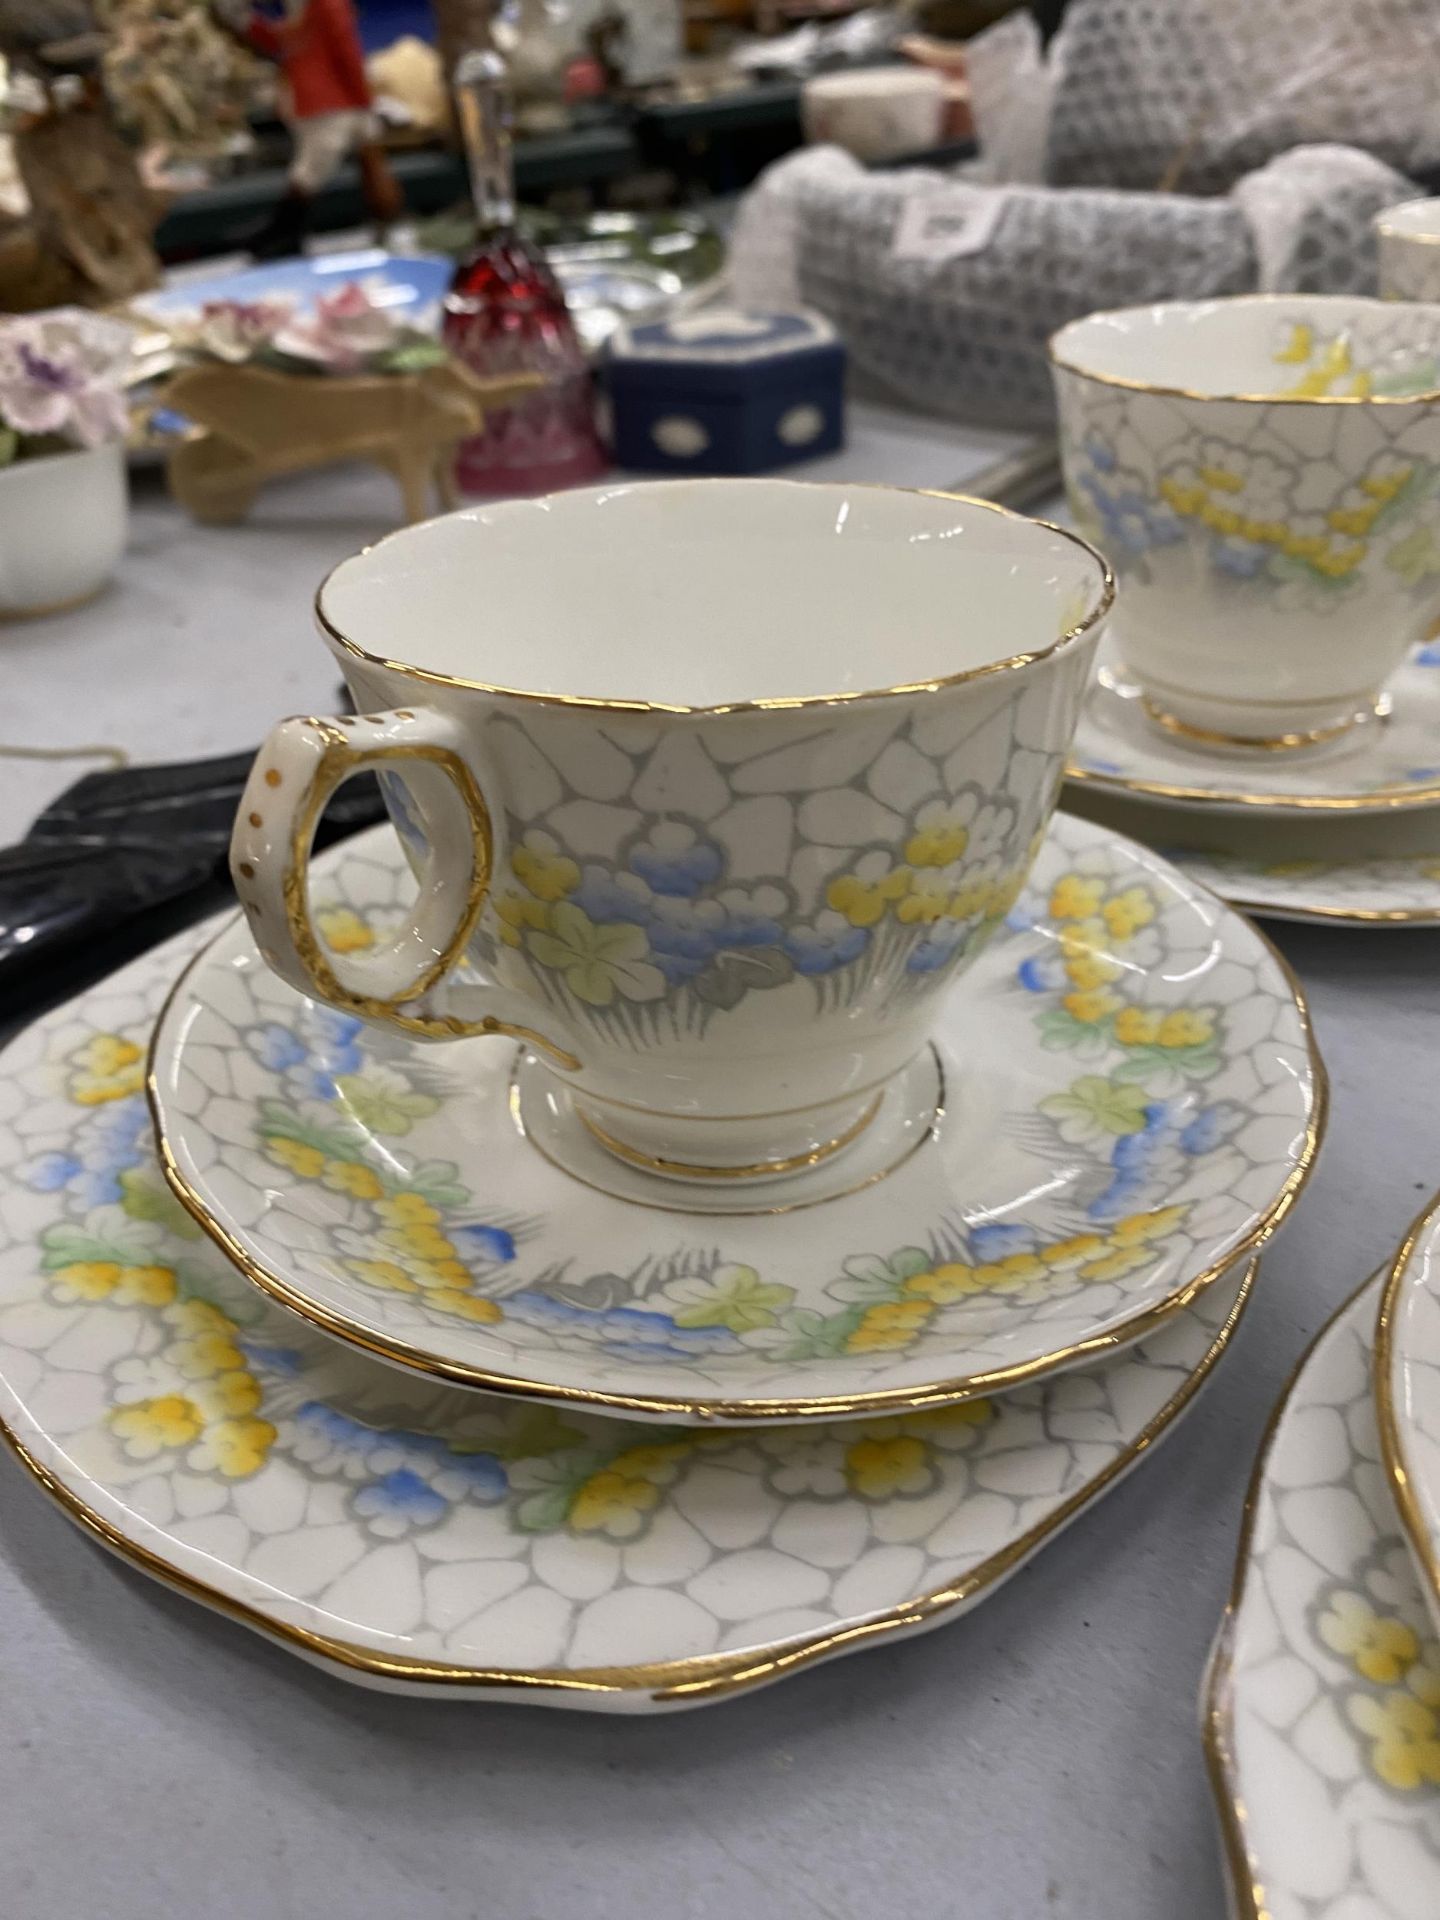 A VINTAGE ROYAL STAFFORD TEASET WITH DAINTY FLORAL PATTERN TO INCLUDE A CAKE PLATE, SUGAR BOWL, - Image 4 of 4